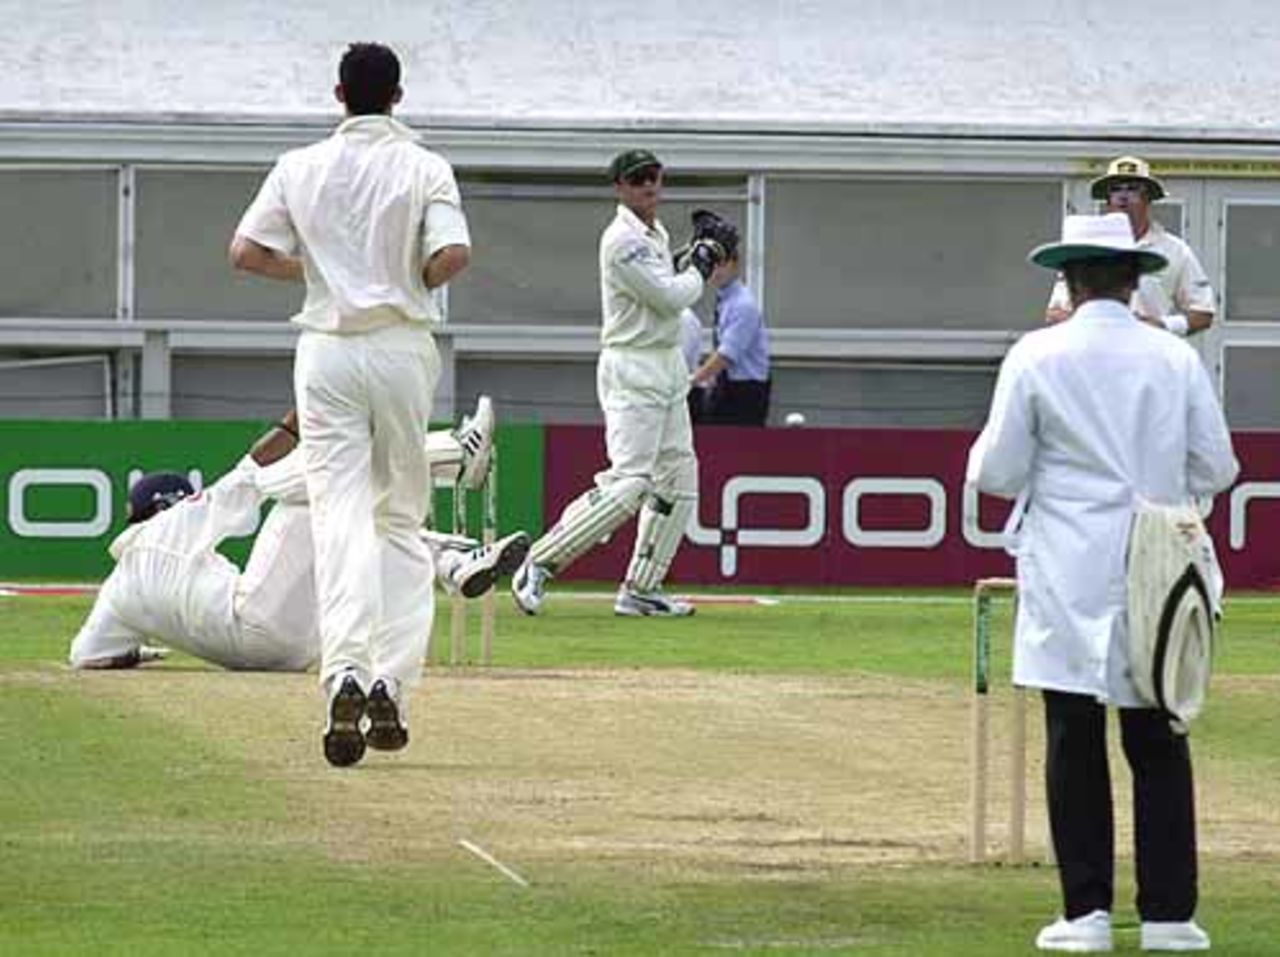 Usman Afzaal is felled by a delivery from Jason Gillespie, England v Australia, The Ashes 4th npower Test, Leeds, 16-20 Aug 2001